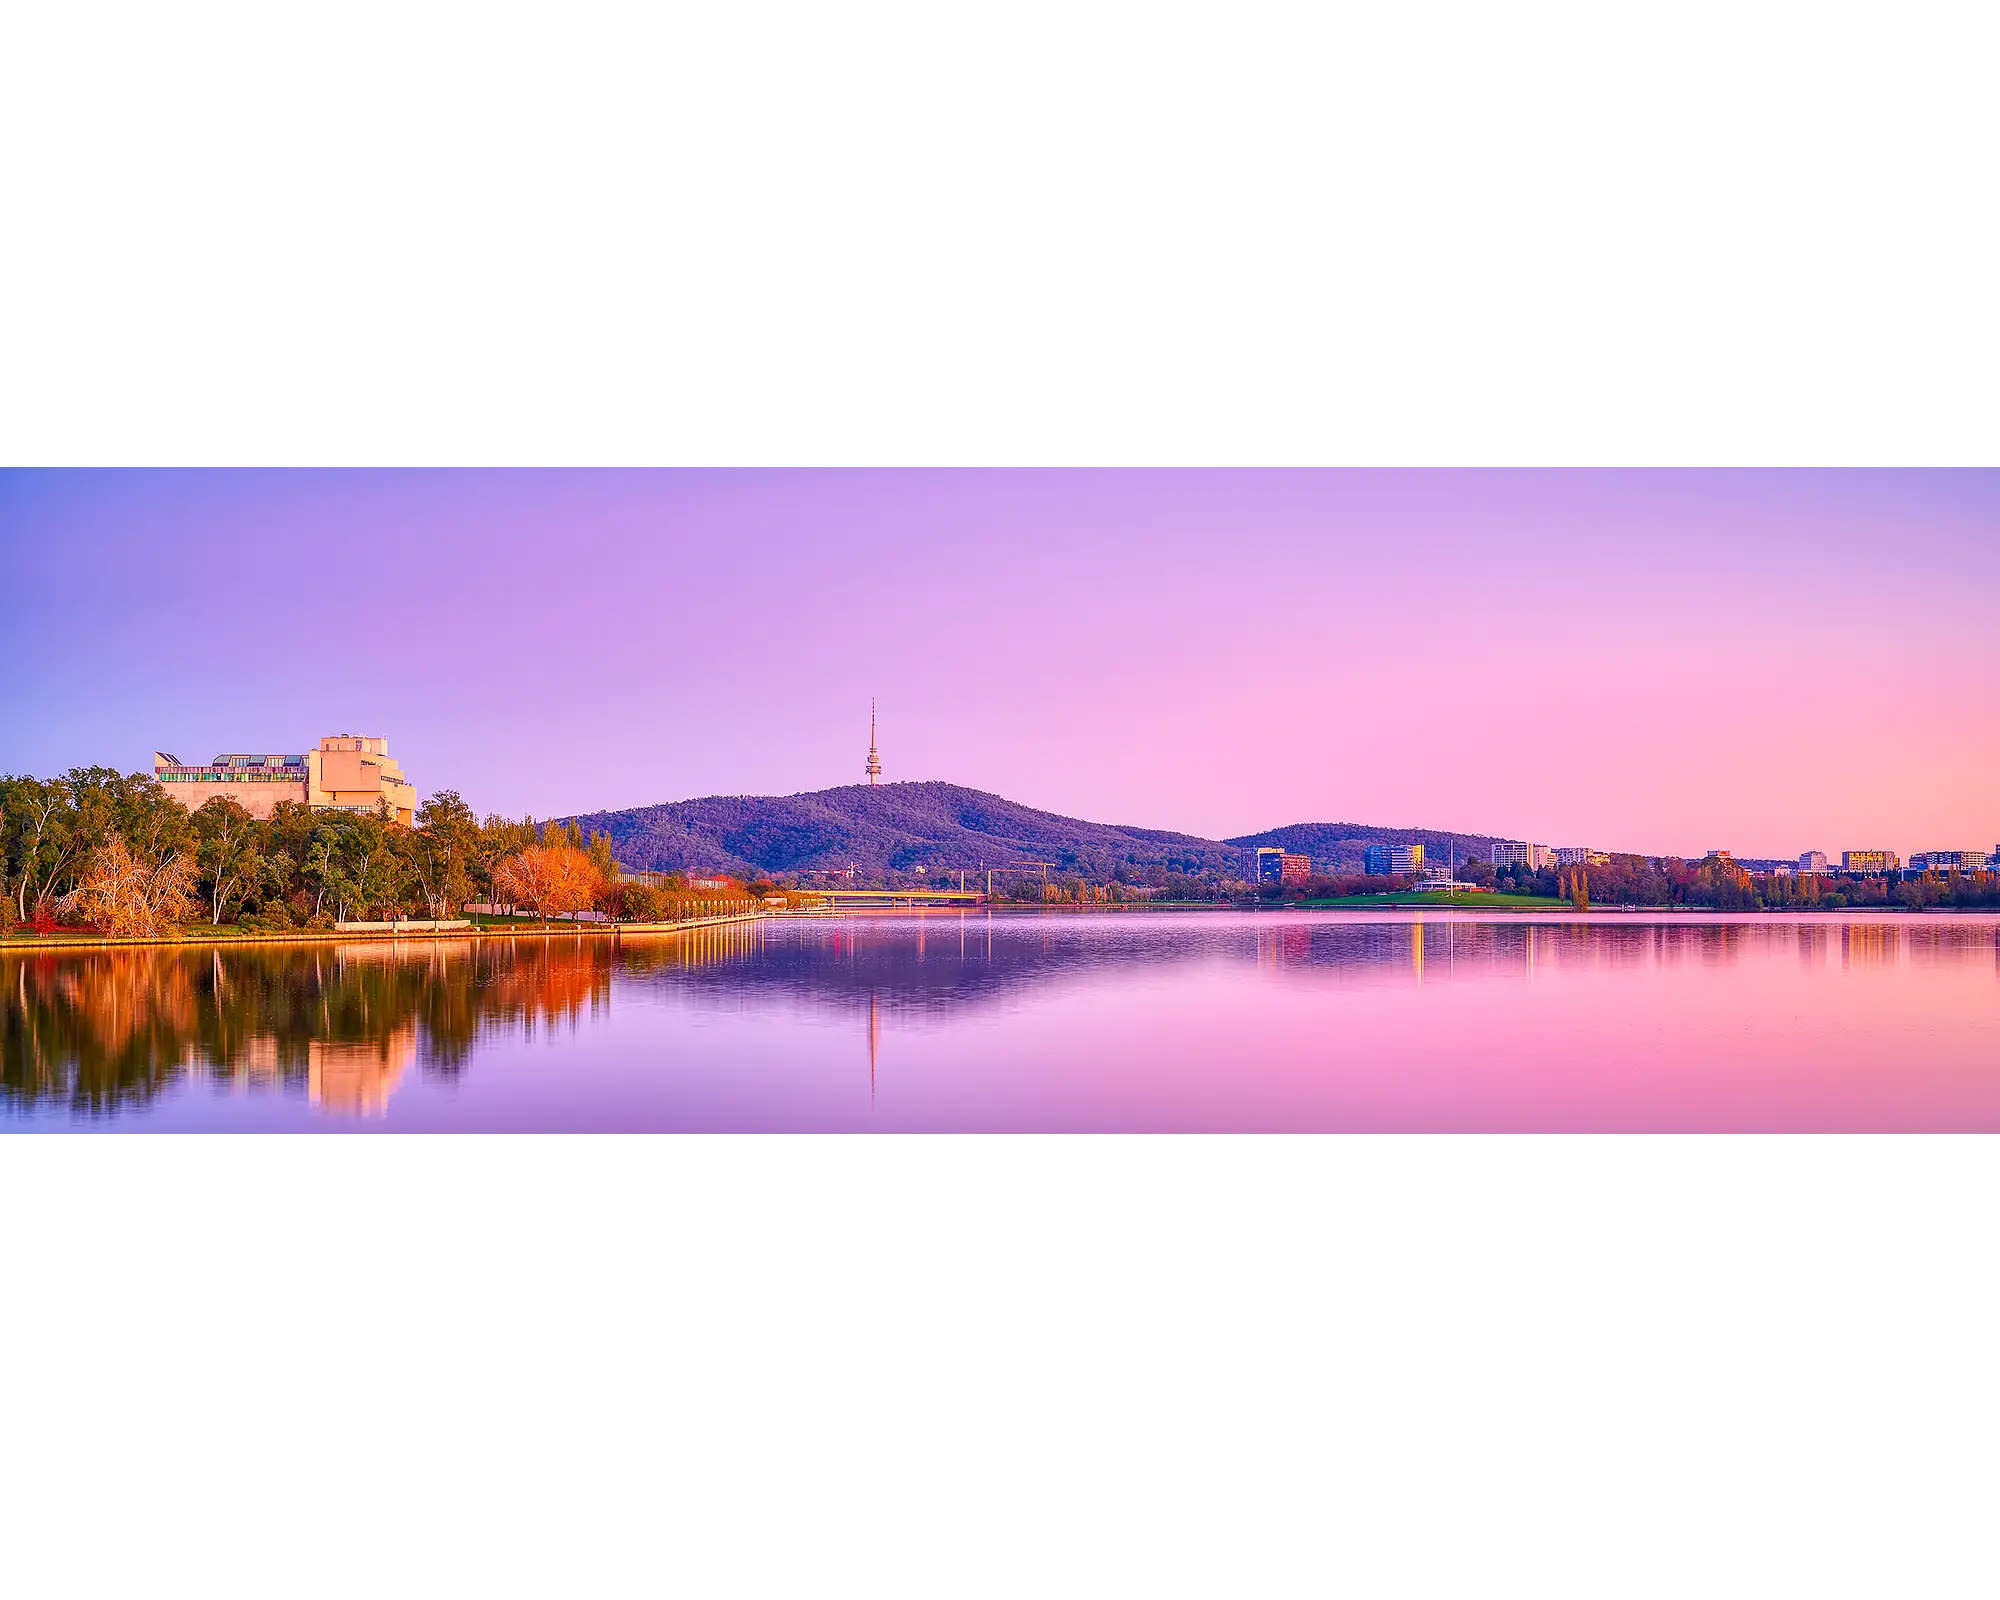 Tint. Purple sunrise over Lake Burley Griffin, Canberra.